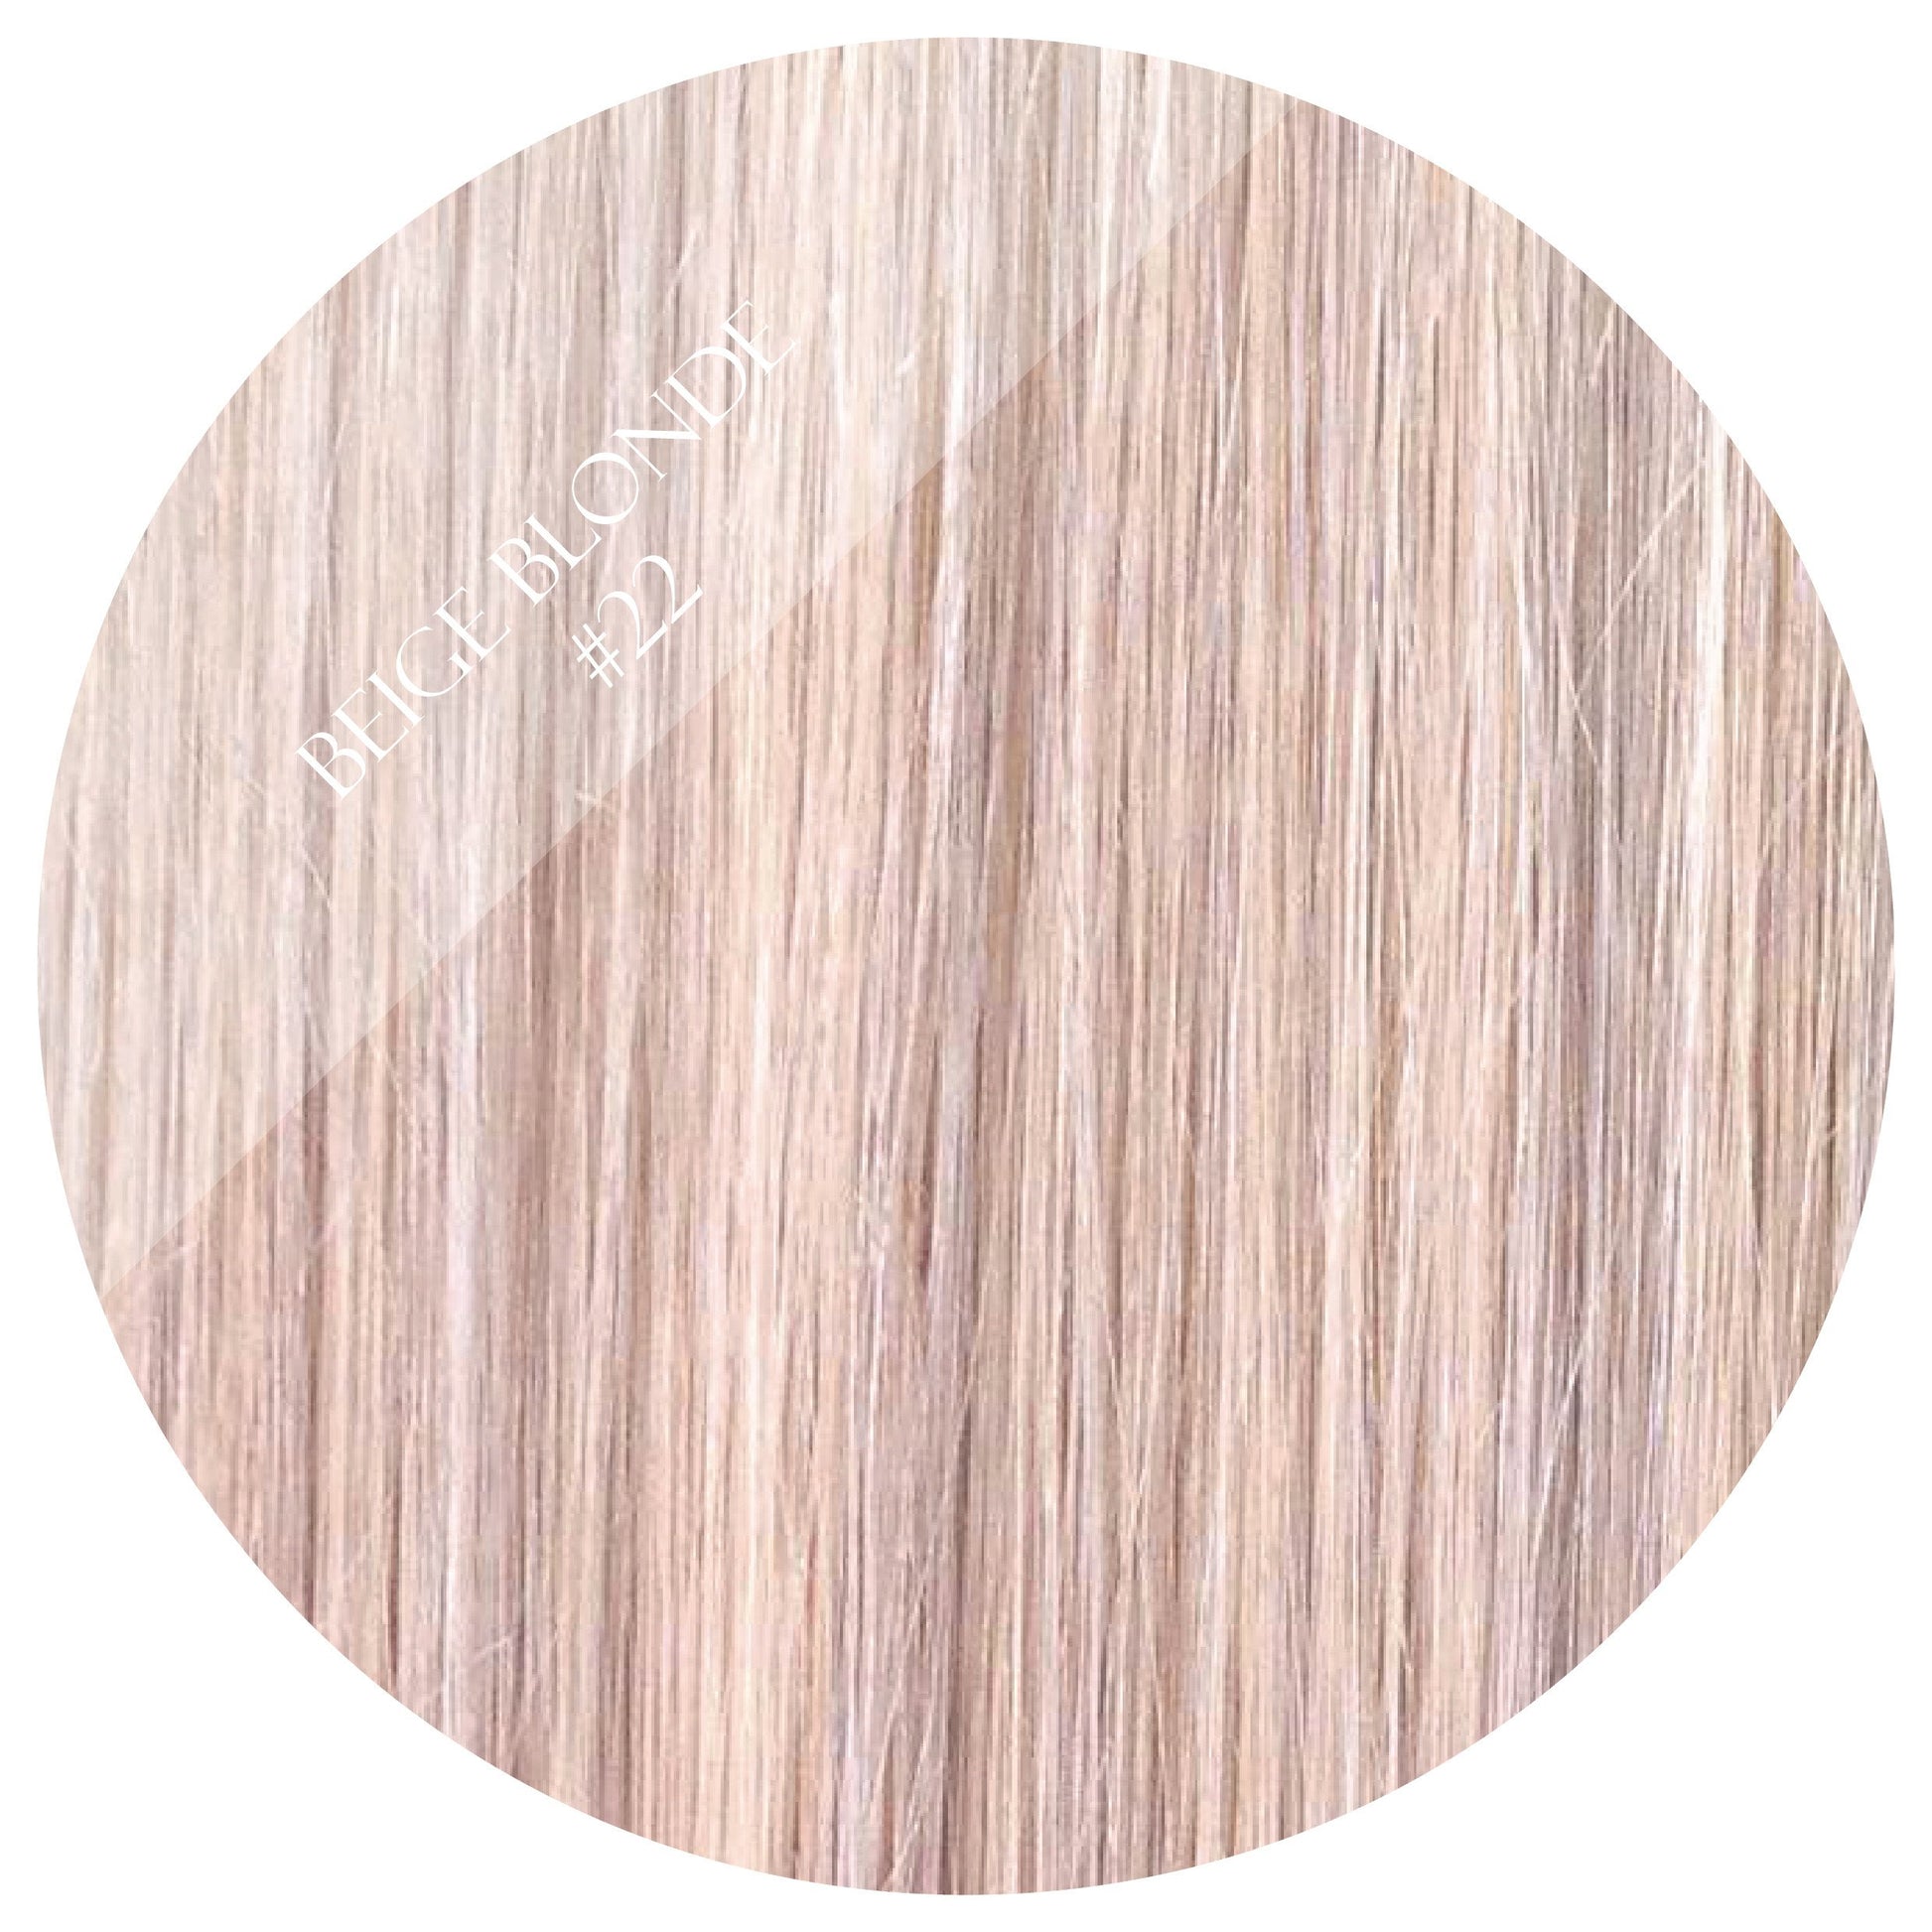 creme brulee blonde #22 clip in hair extensions 22inch deluxe